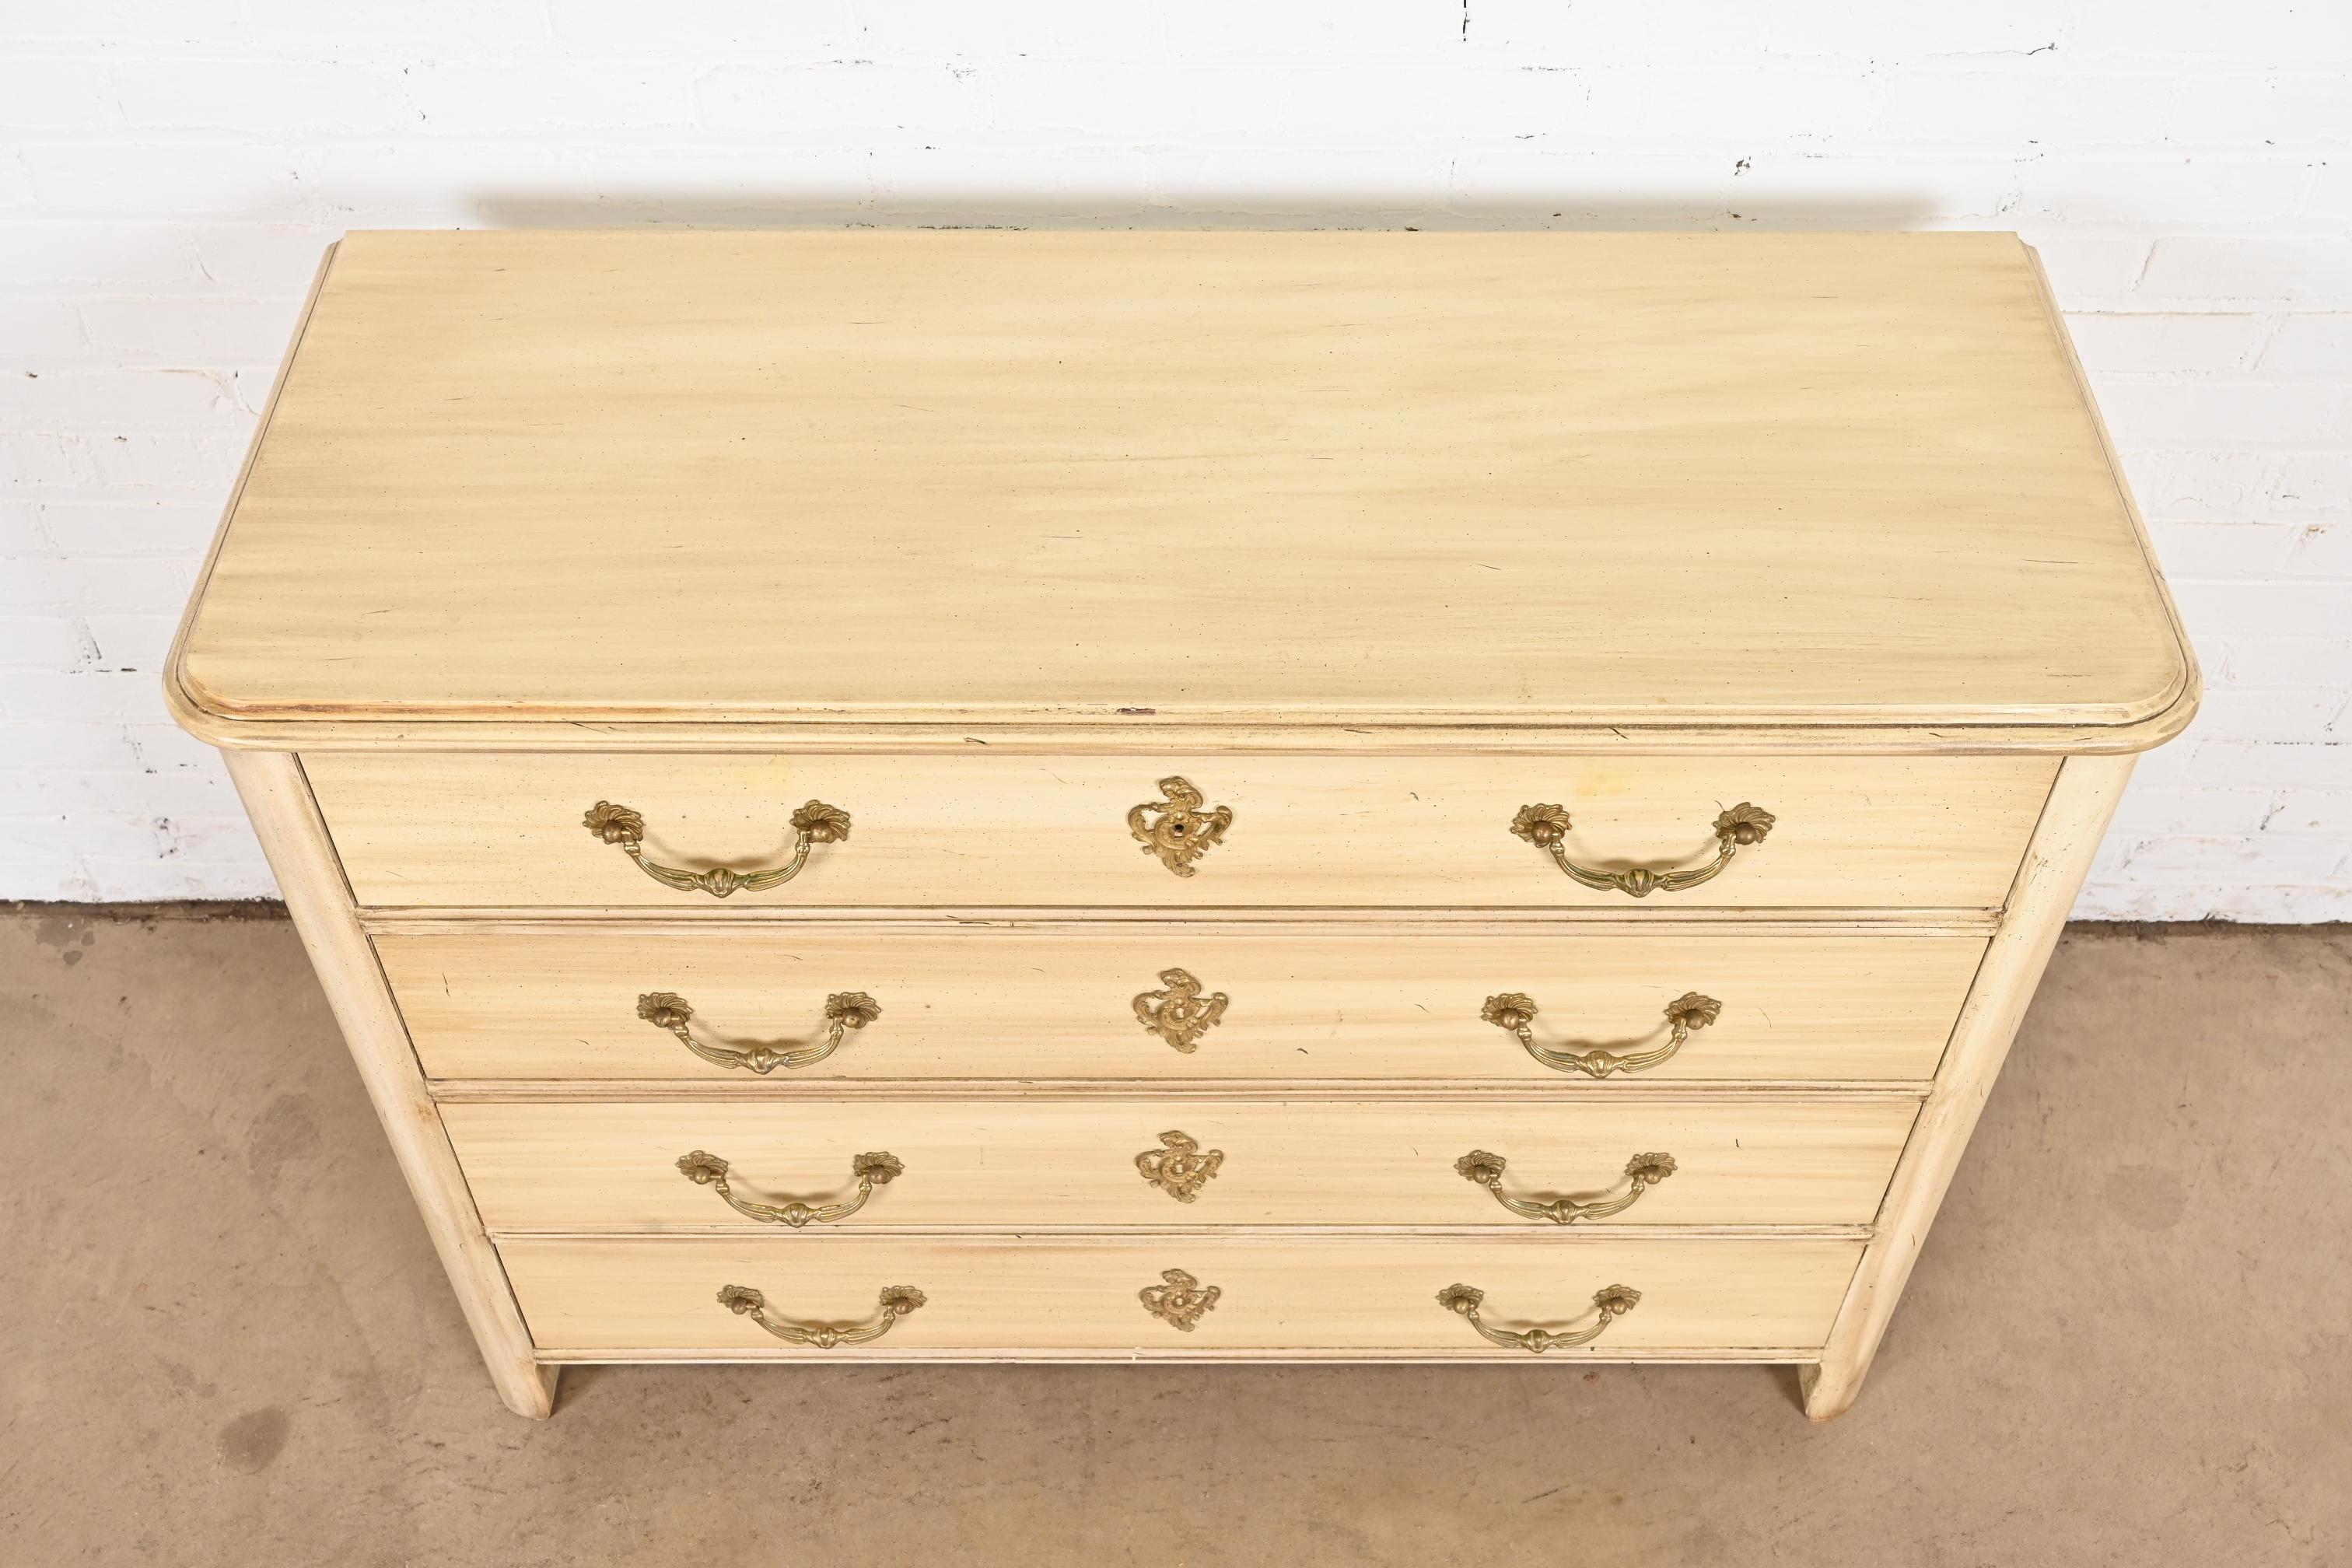 Baker Furniture French Provincial Cream Painted Chest of Drawers, Circa 1960s For Sale 2